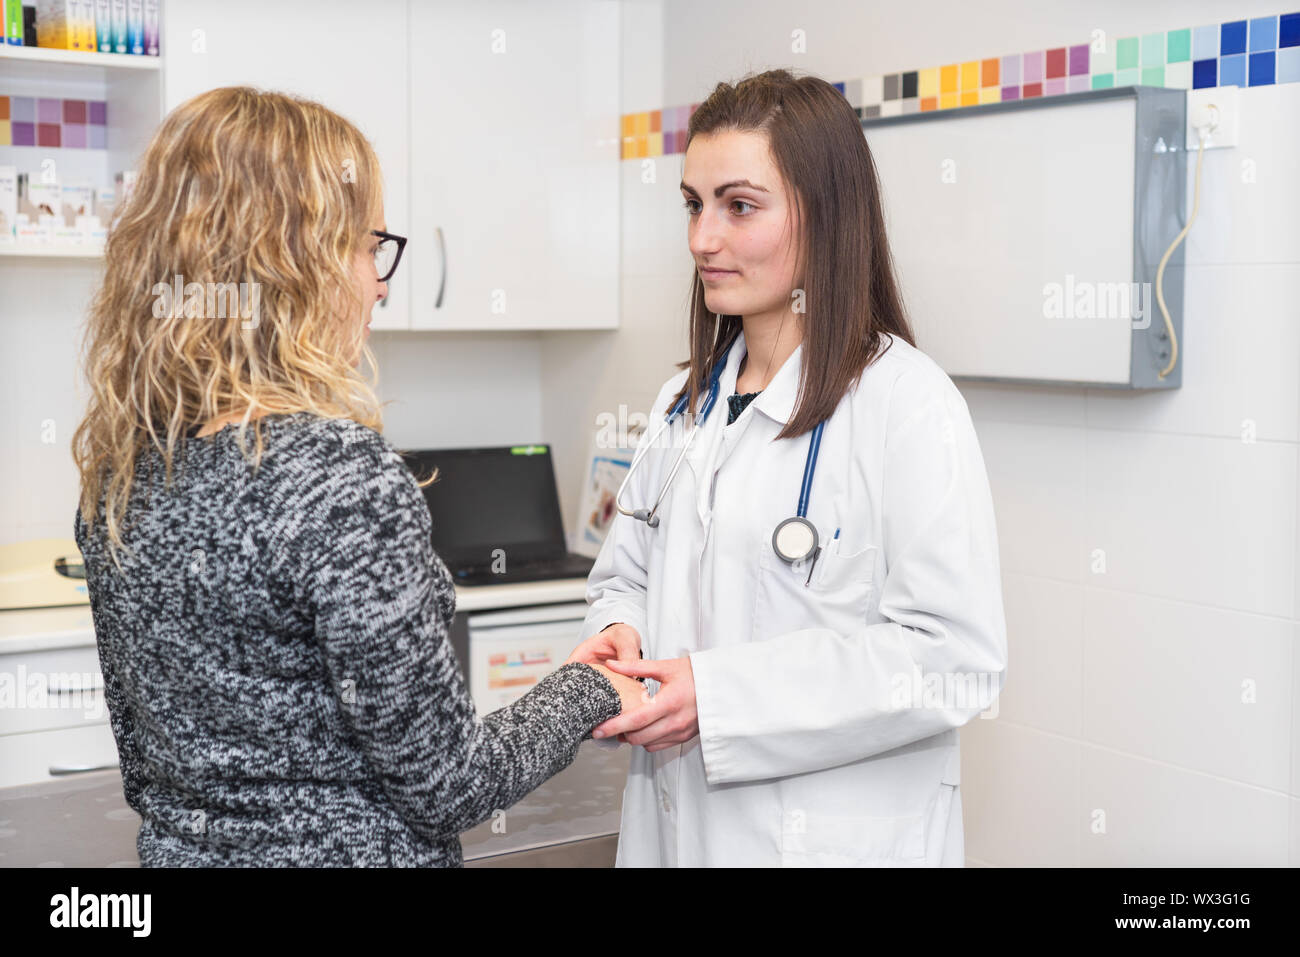 Doctor holding patient's hands, helping and empathy concept. Stock Photo